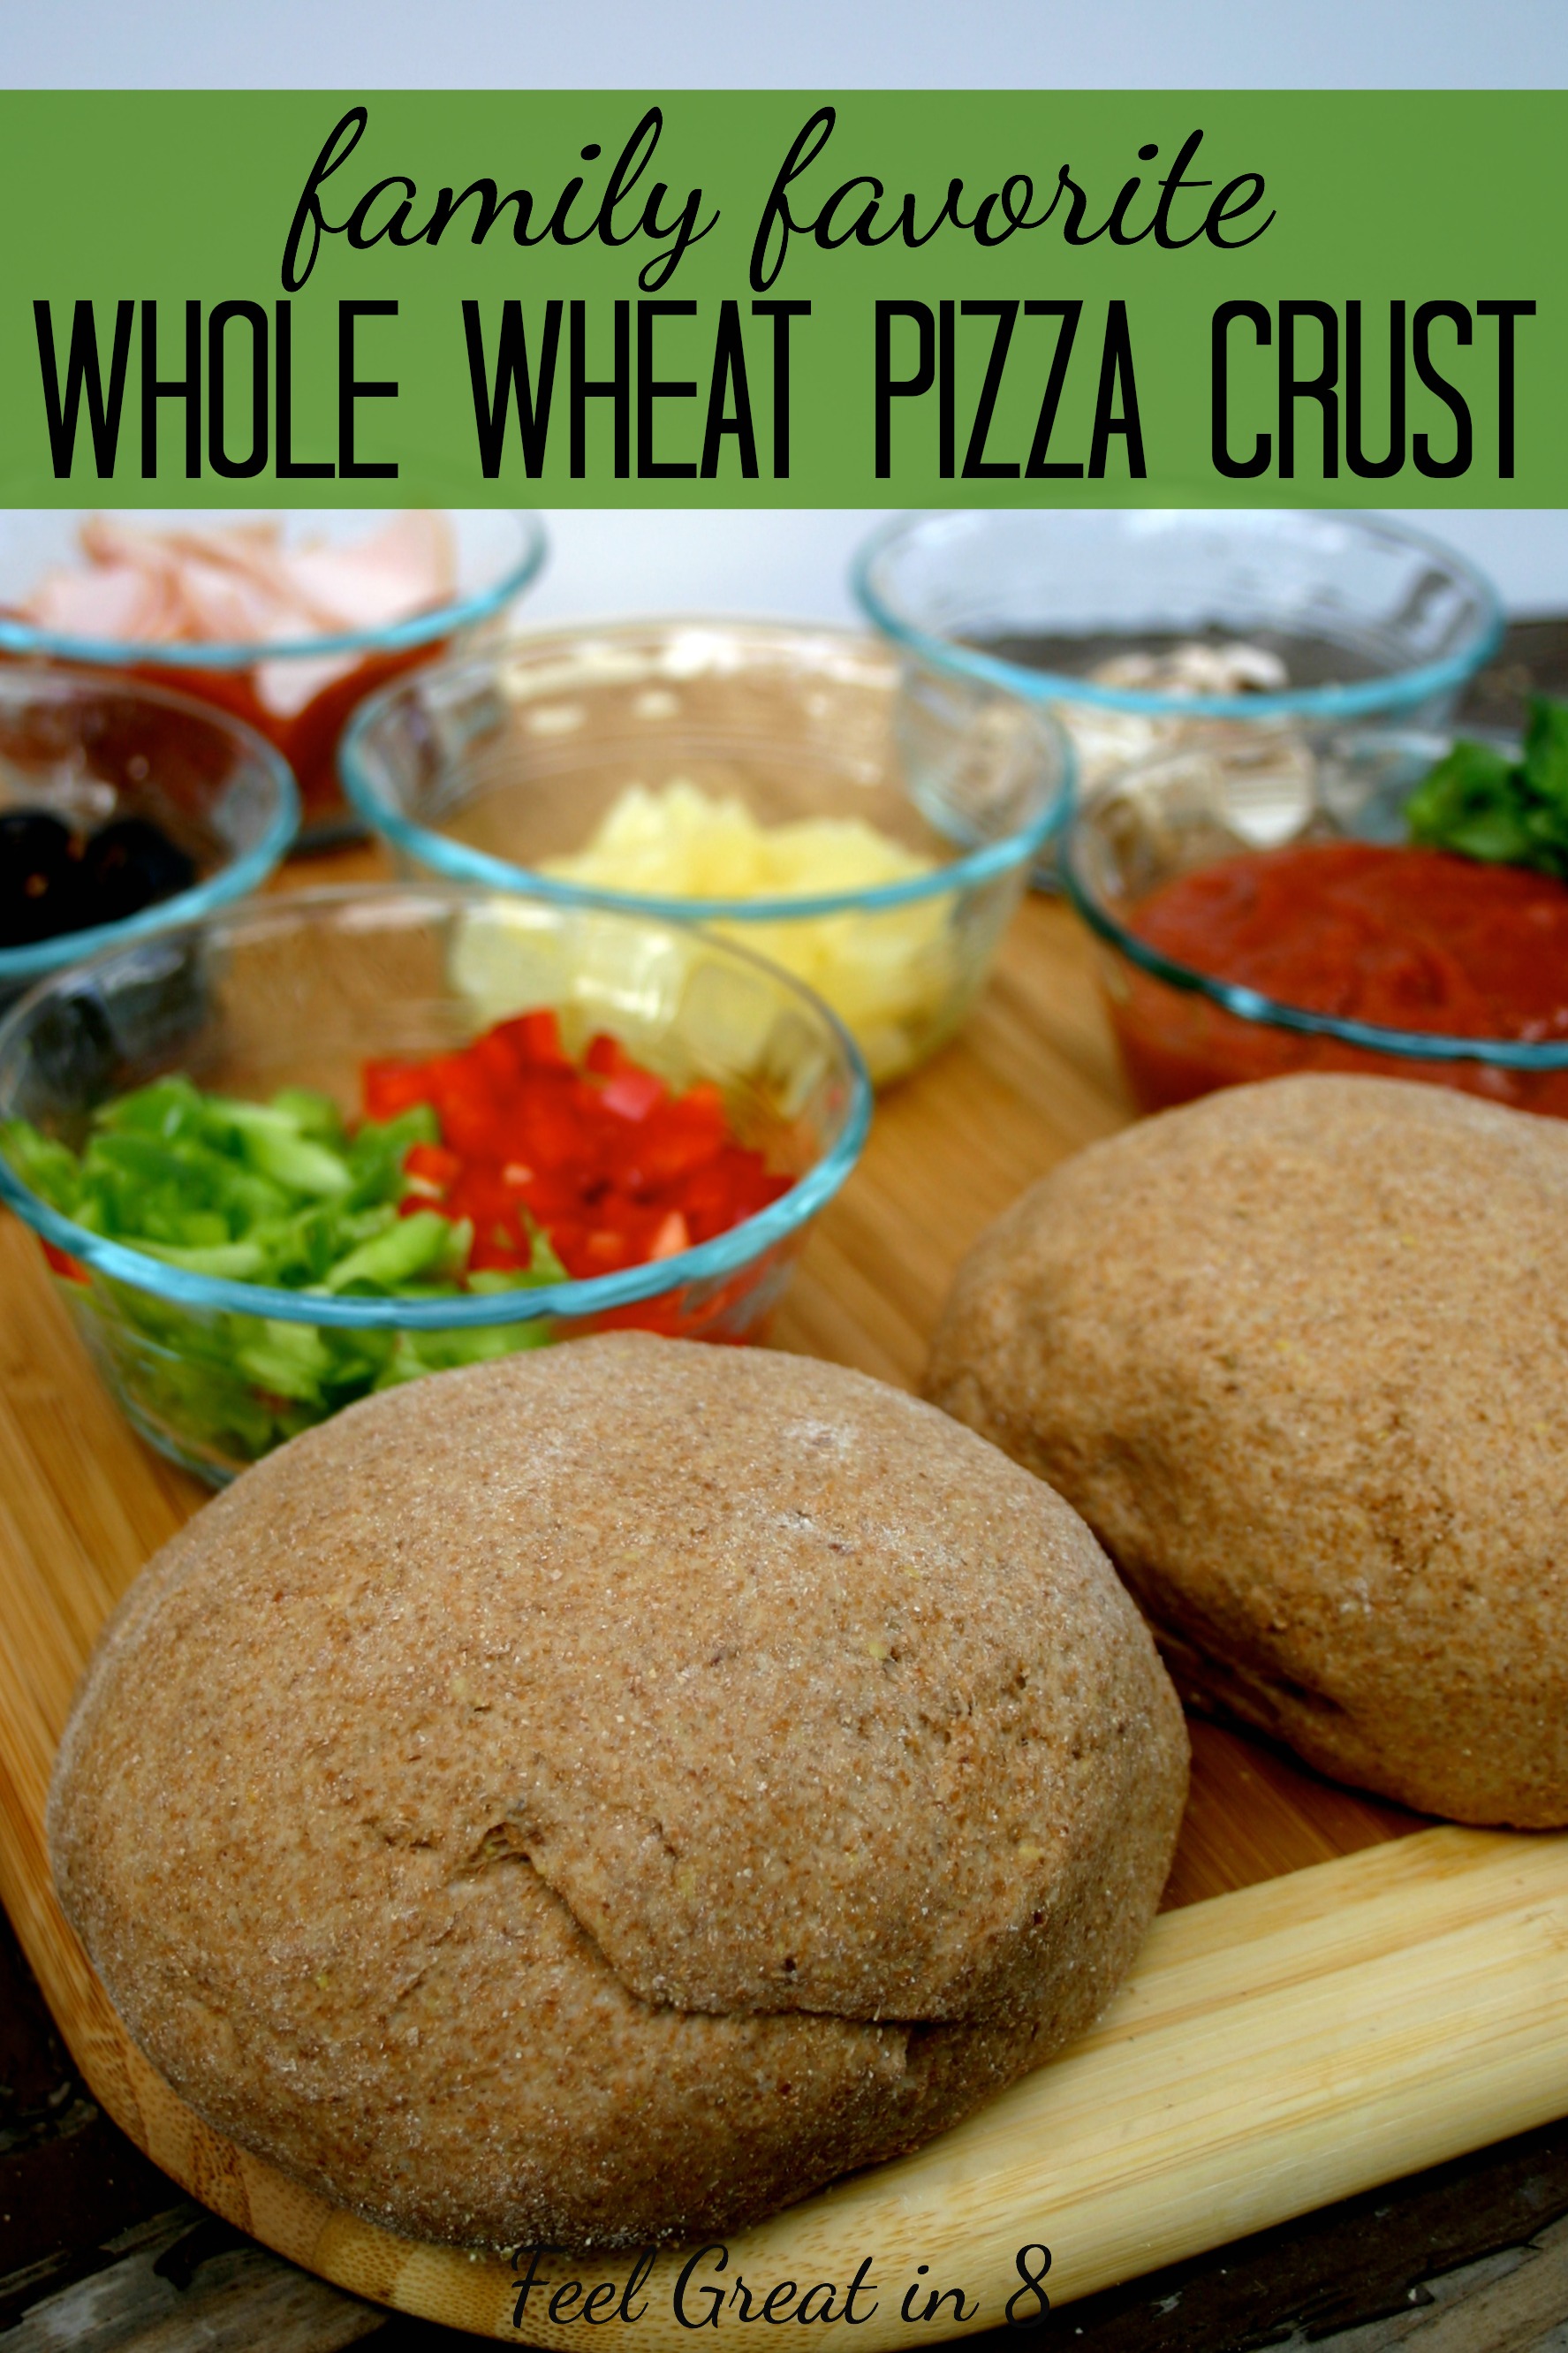 100% Whole Wheat Pizza Crust - Feel Great in 8 Blog